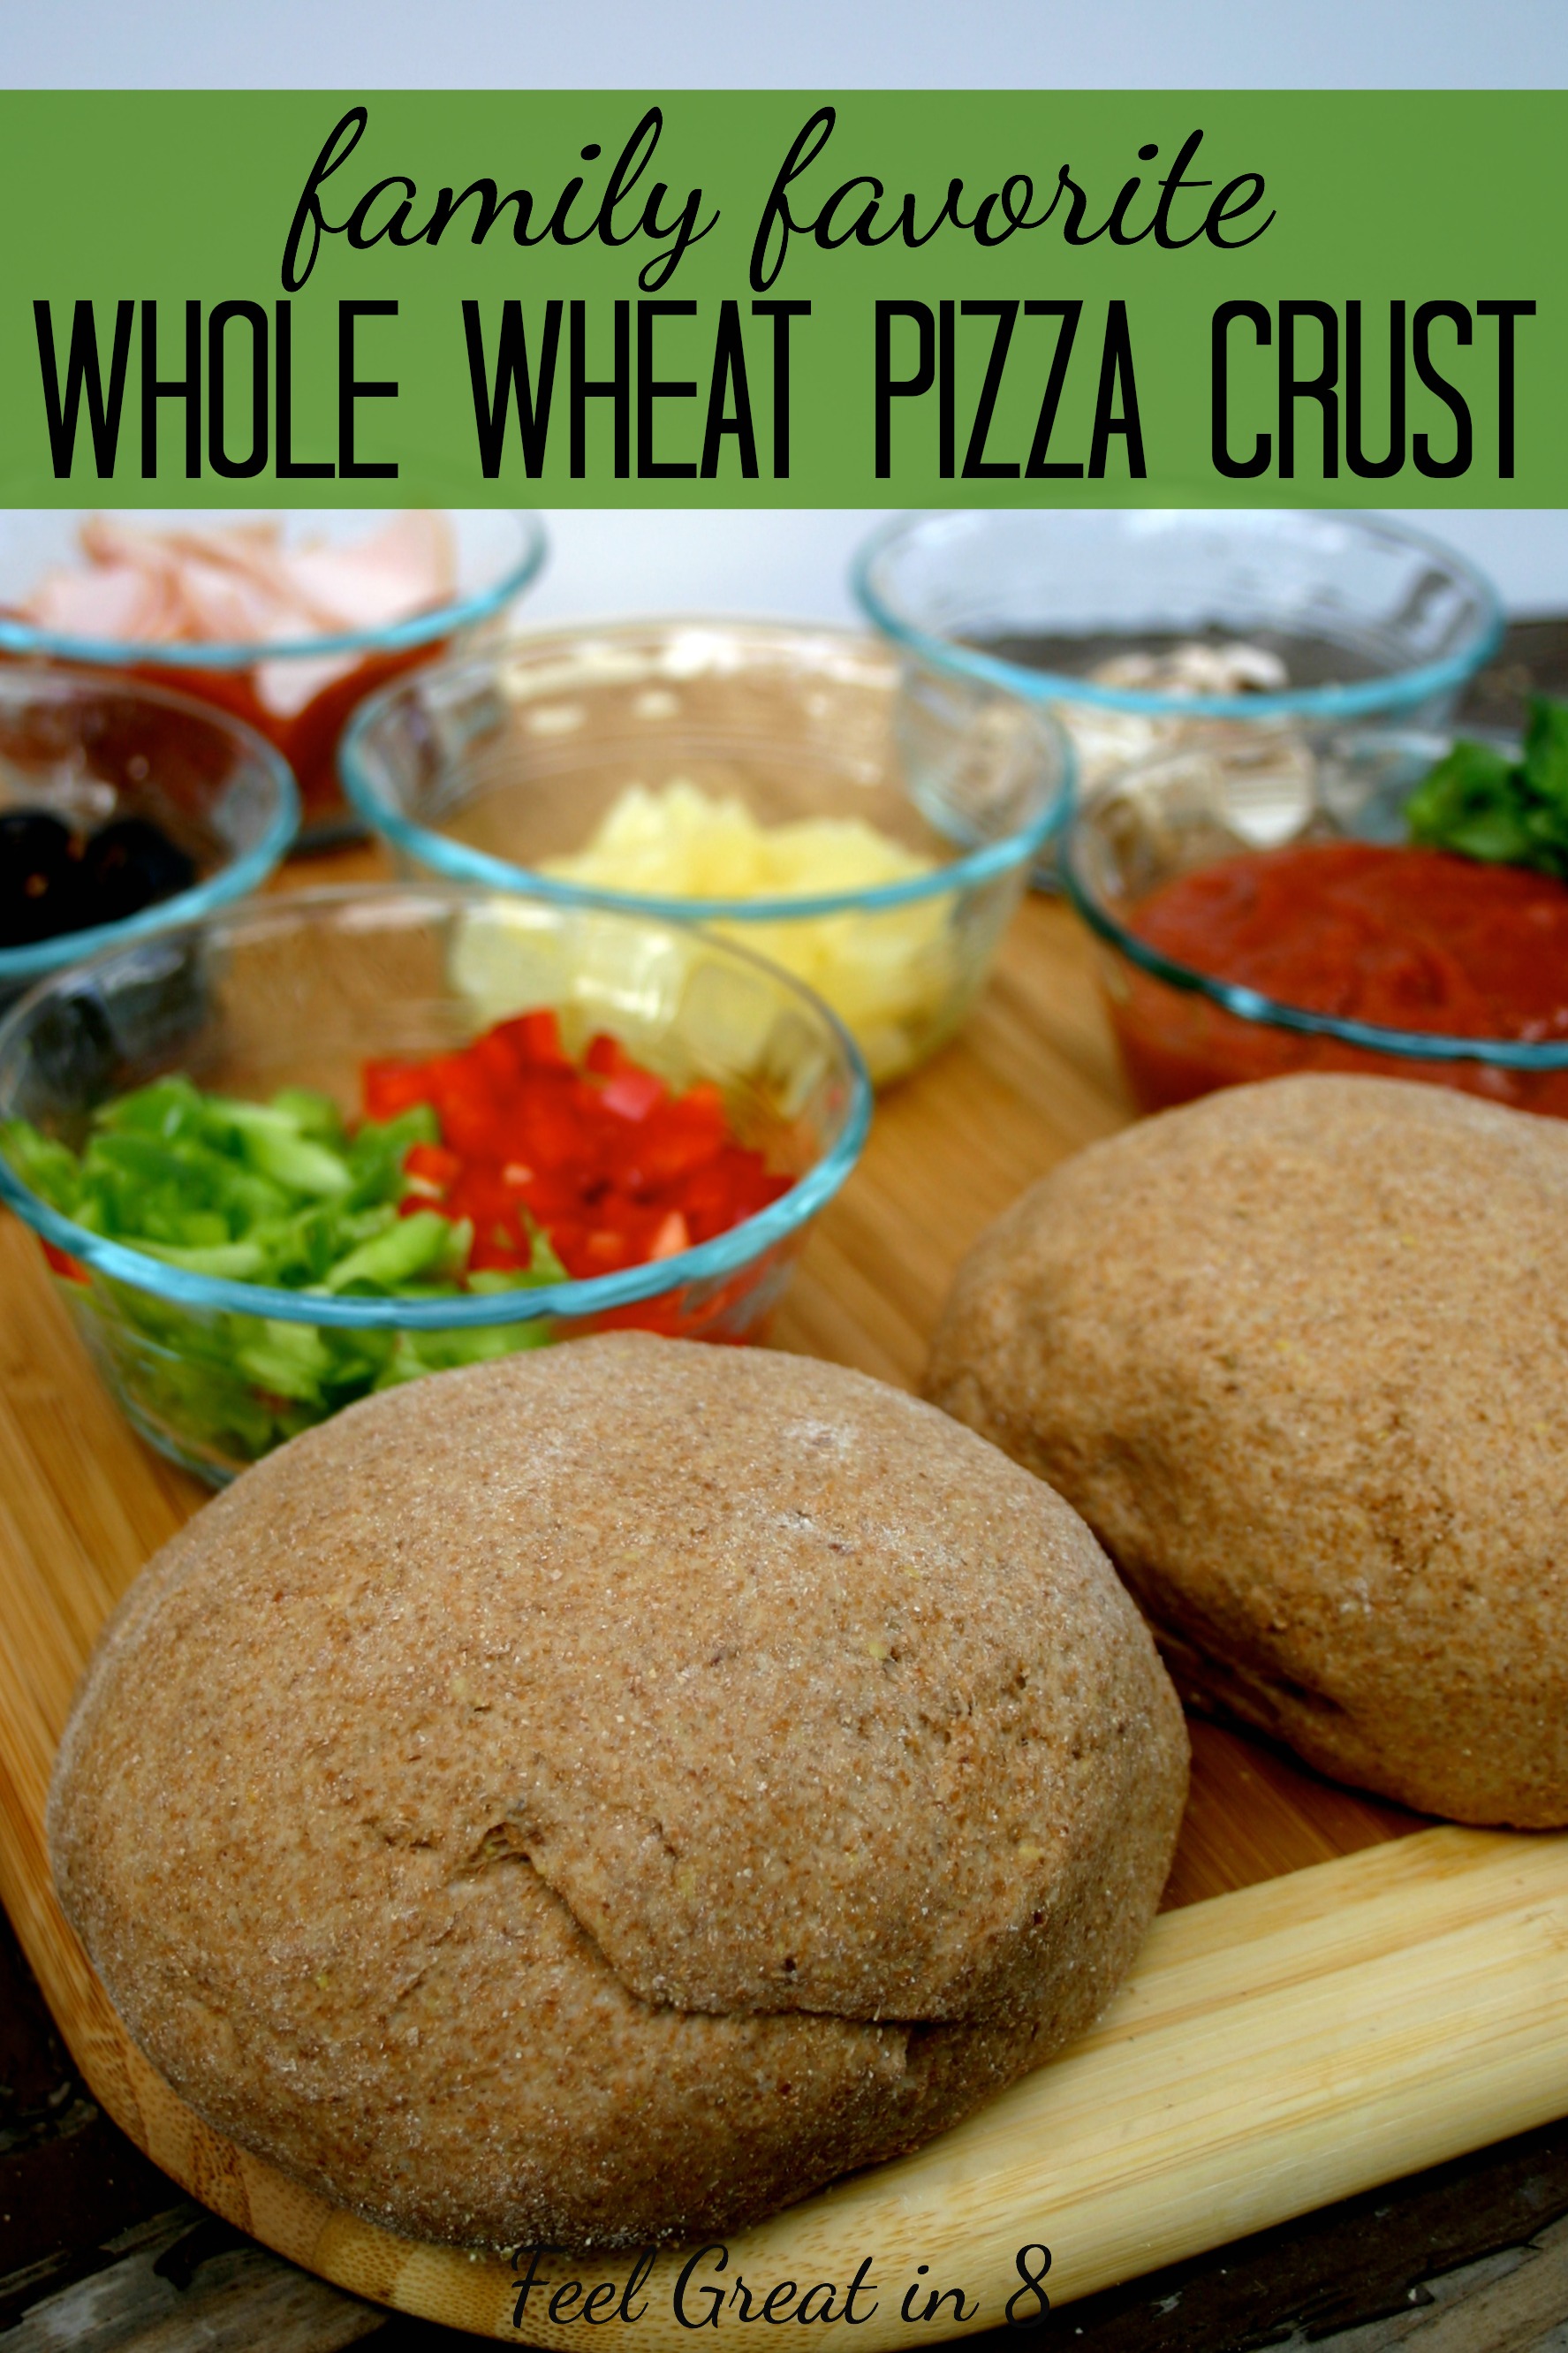 100% Whole Wheat Pizza Crust - Feel Great in 8 Blog